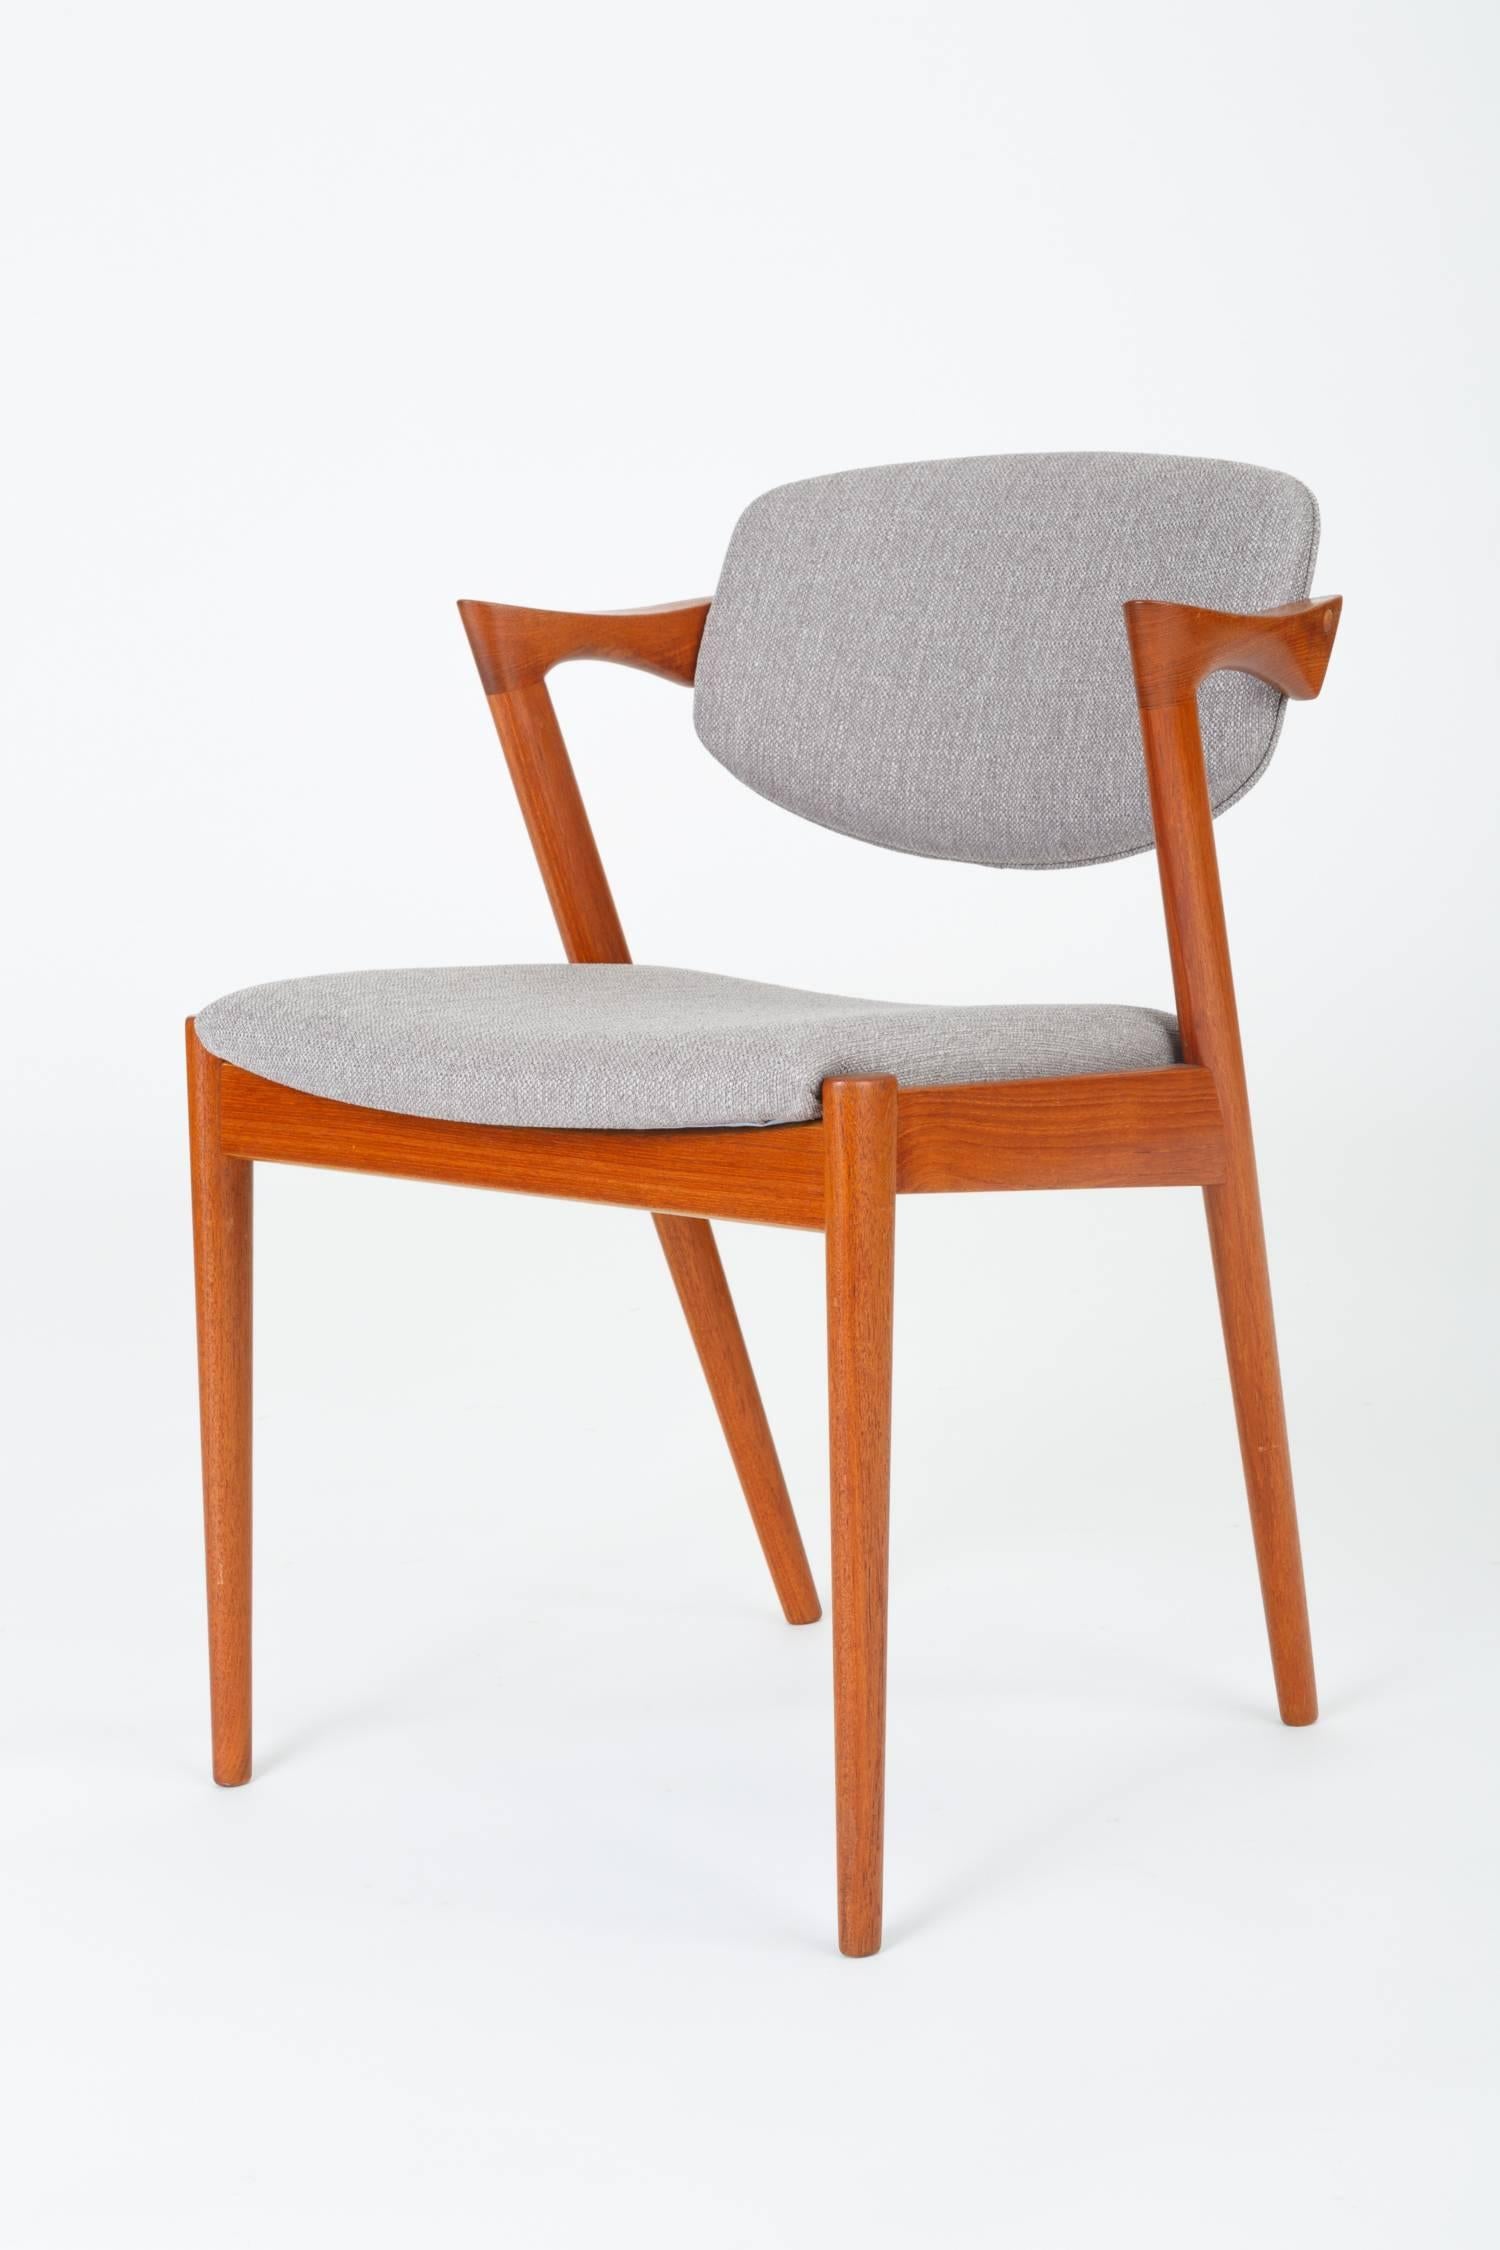 Mid-20th Century Set of Six Model 42 Teak Dining Chairs by Kai Kristiansen for Schou Andersen